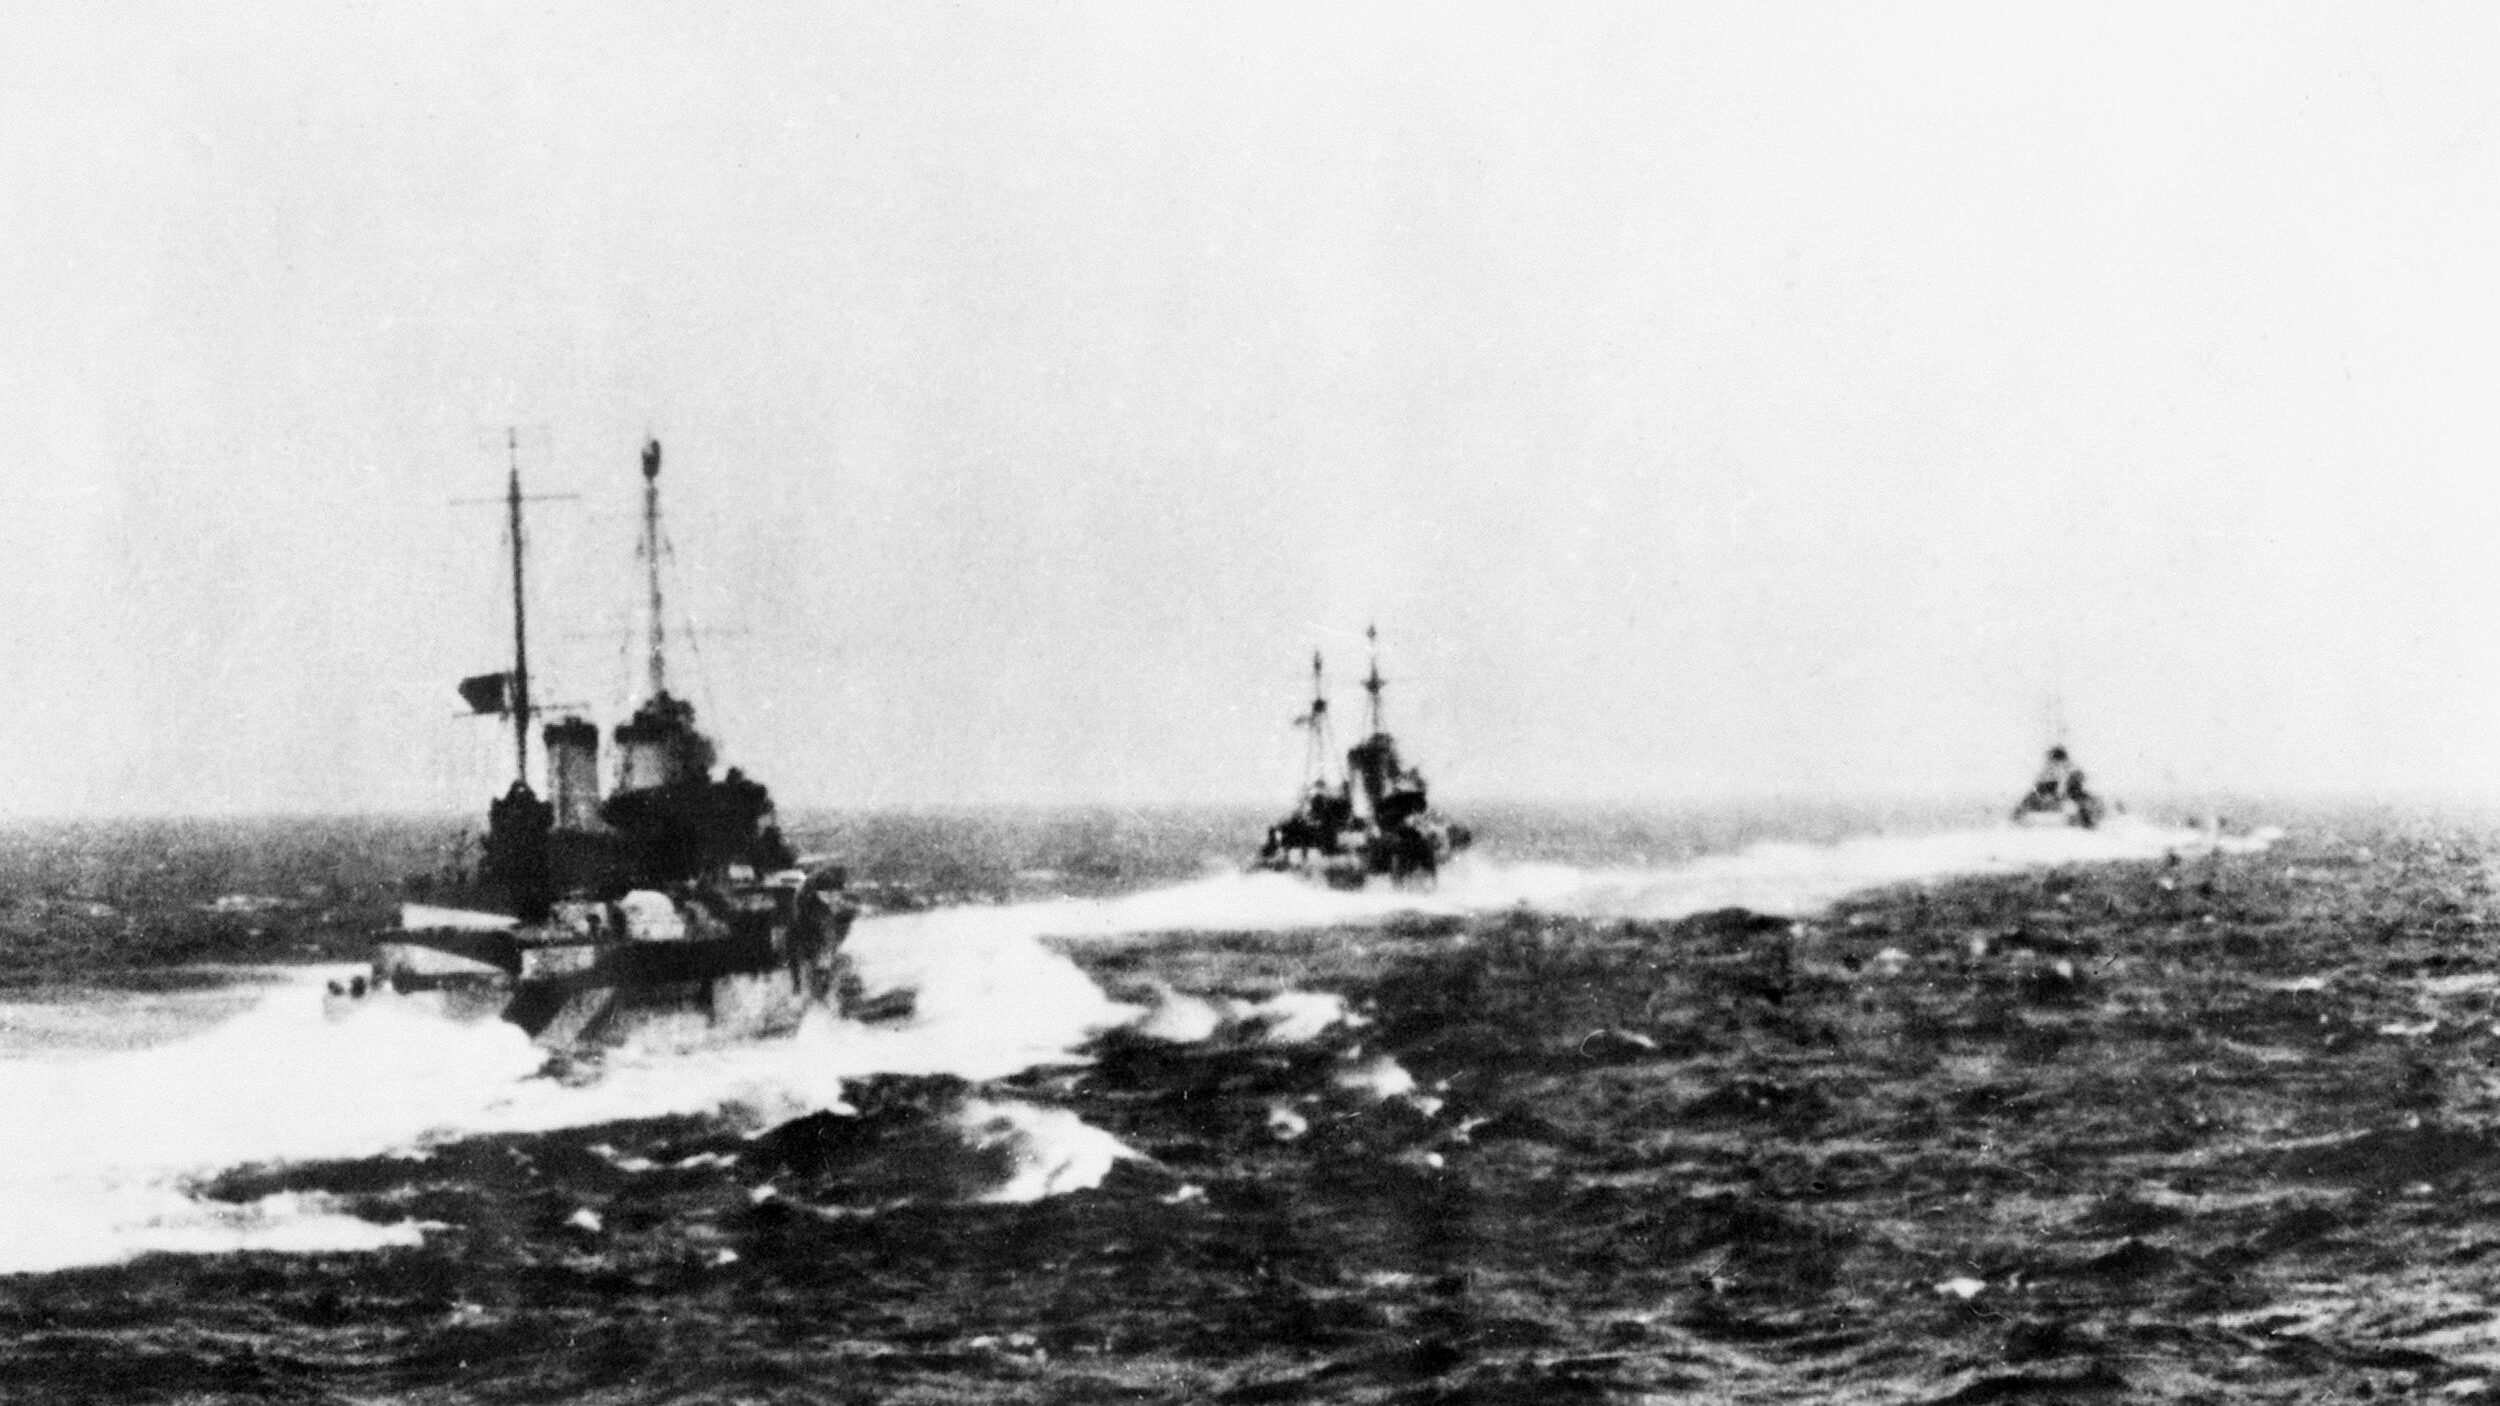 Seen from the deck of the Royal Navy cruiser HMS Gloucester, the British cruisers Ajax and Orion sail in company with the Australian cruiser HMAS Perth.